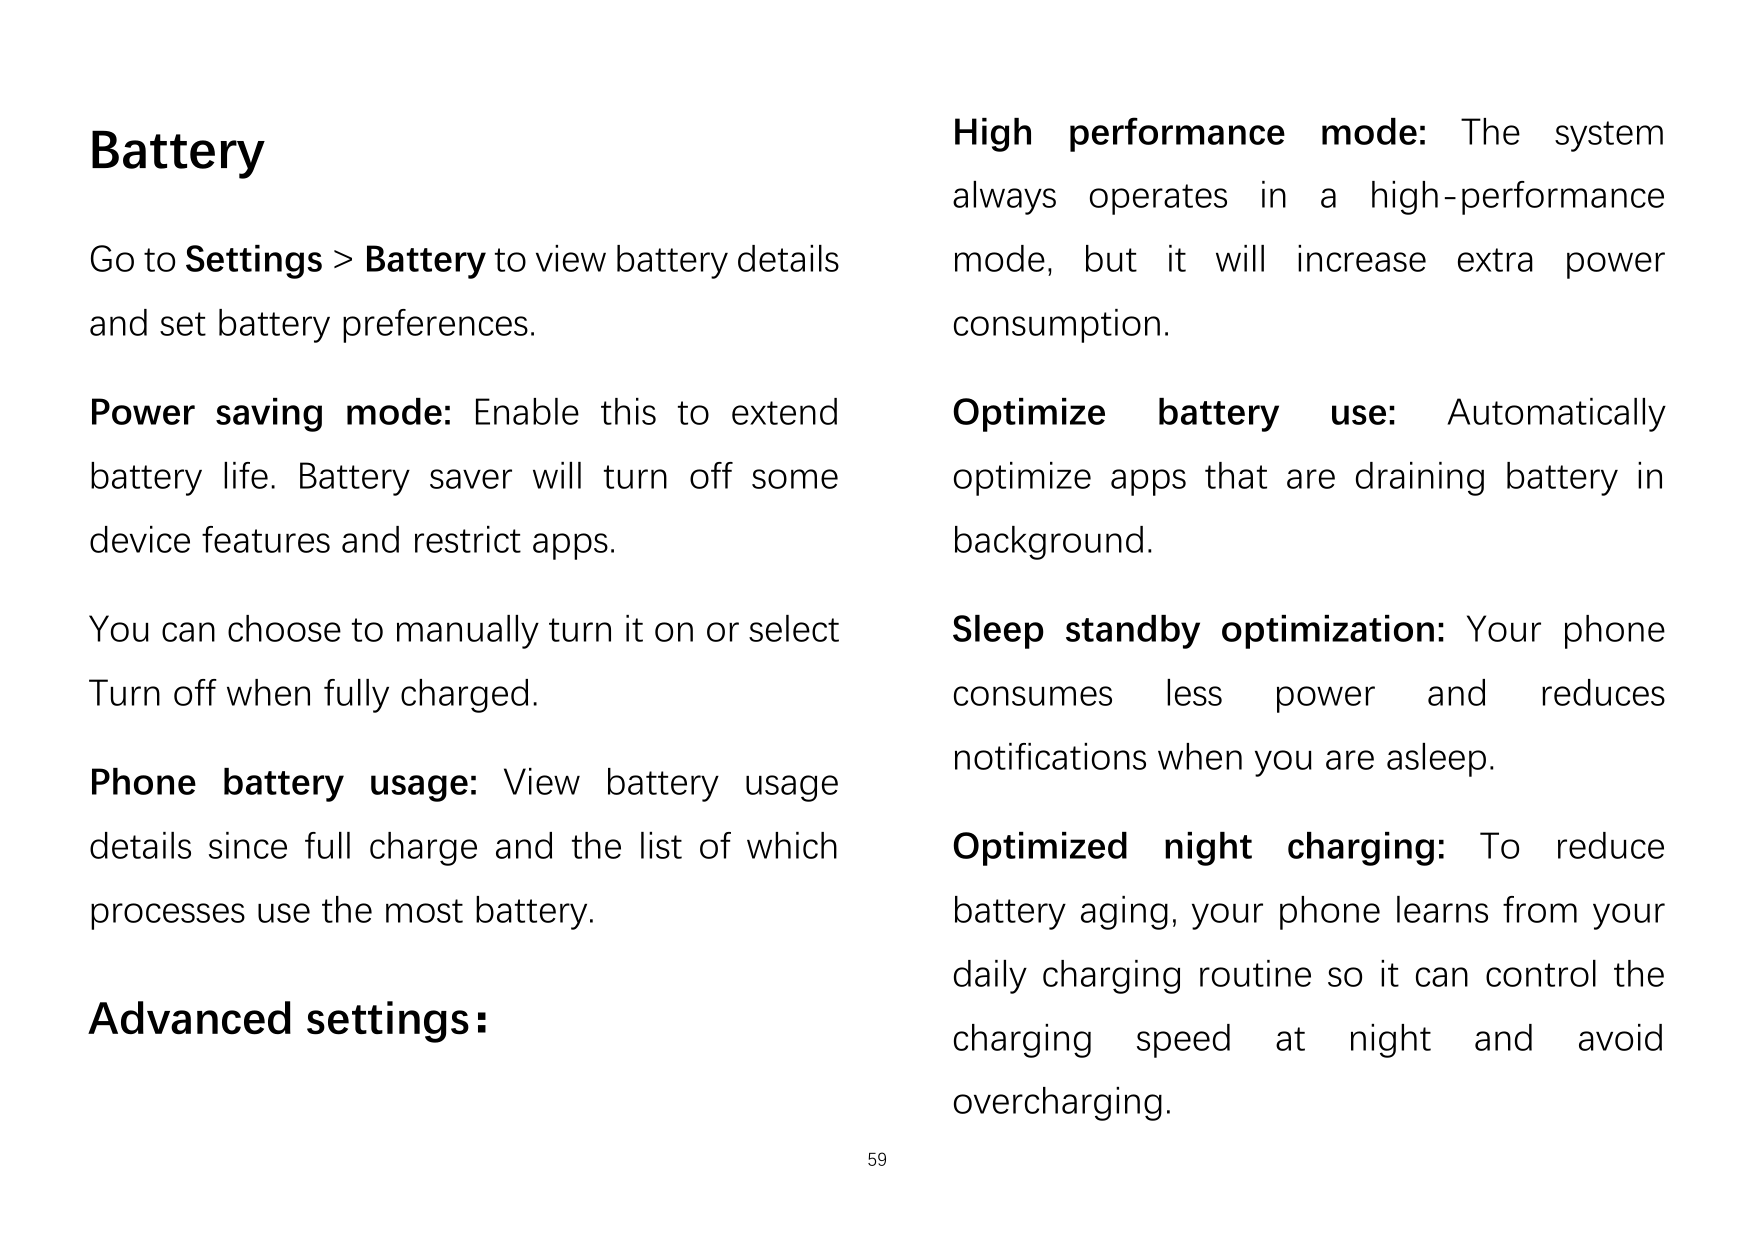 BatteryHigh performance mode: The systemGo to Settings > Battery to view battery detailsmode, but it will increase extra poweran